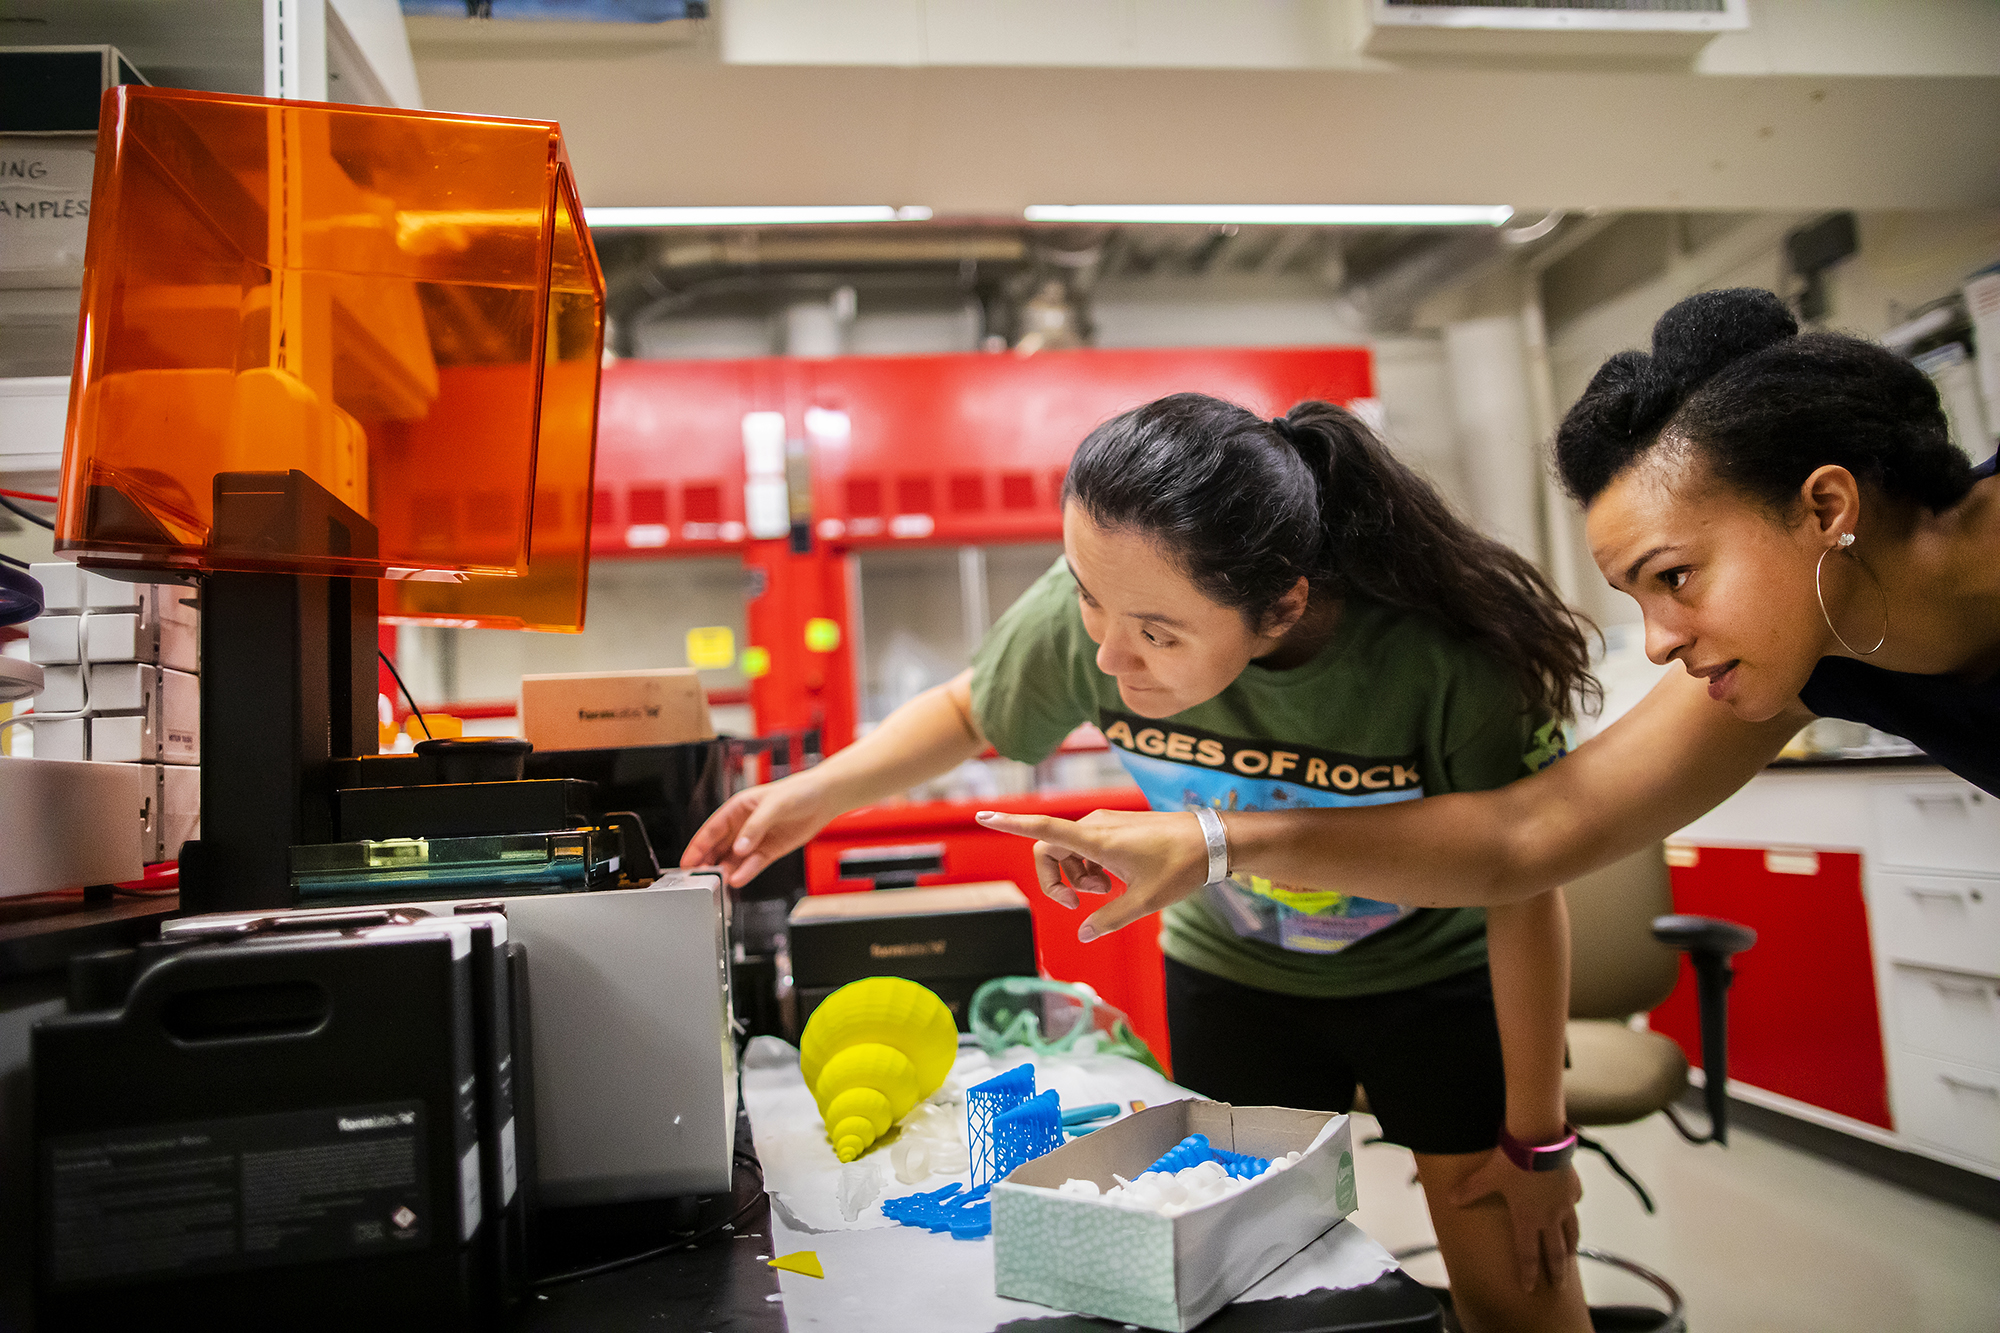 Two scientists point to and inspect the output of a 3D printer in a lab